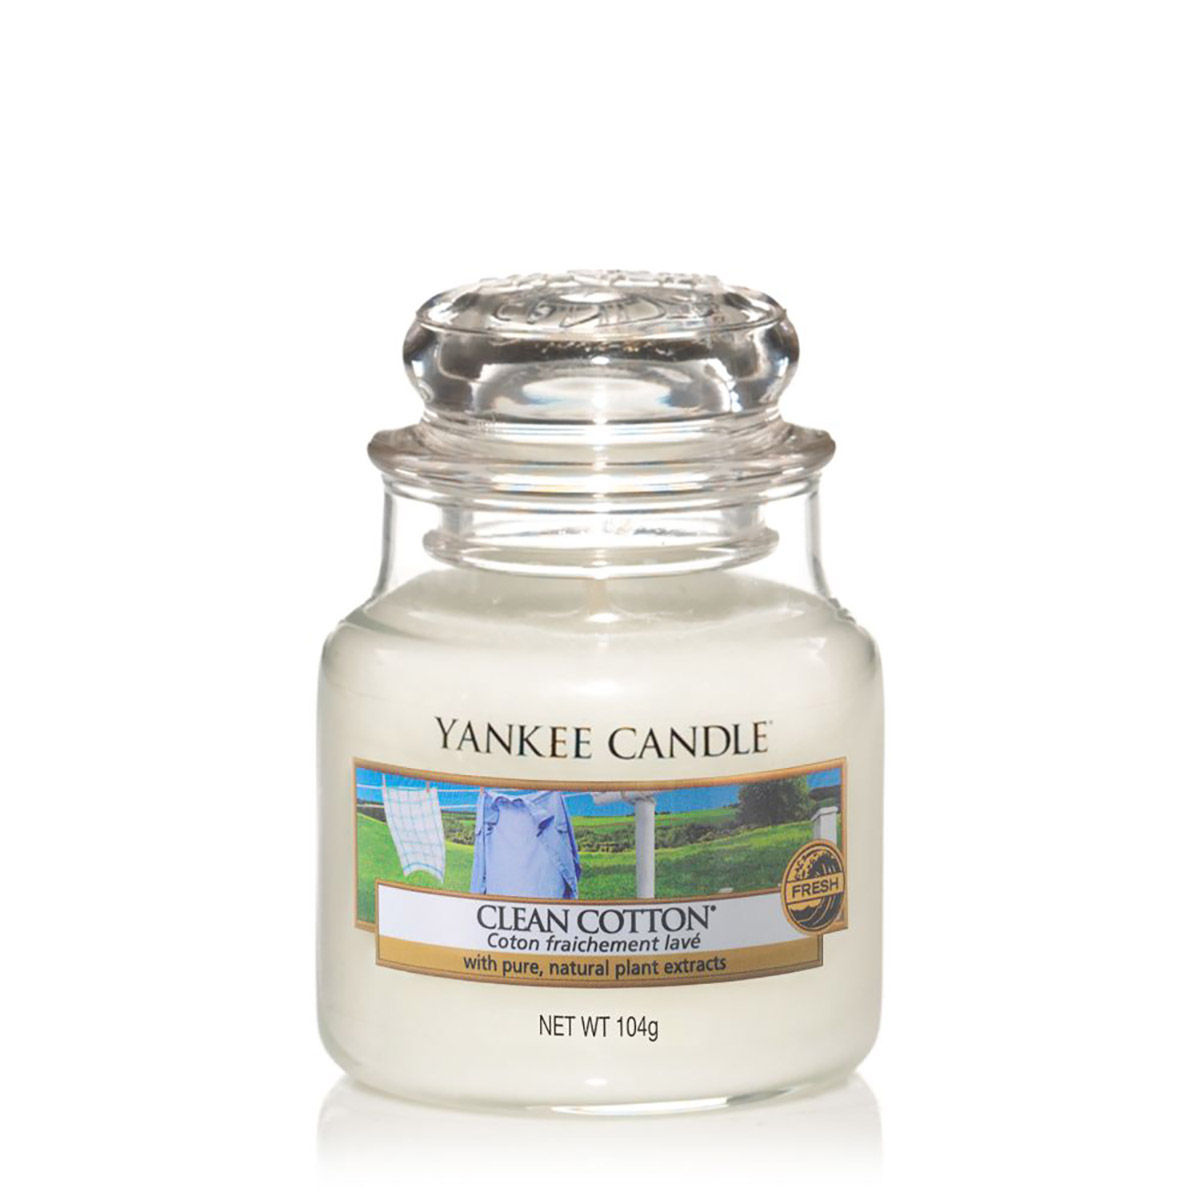 Buy Yankee Candle Classic Small Jar Clean Cotton Scented Candles